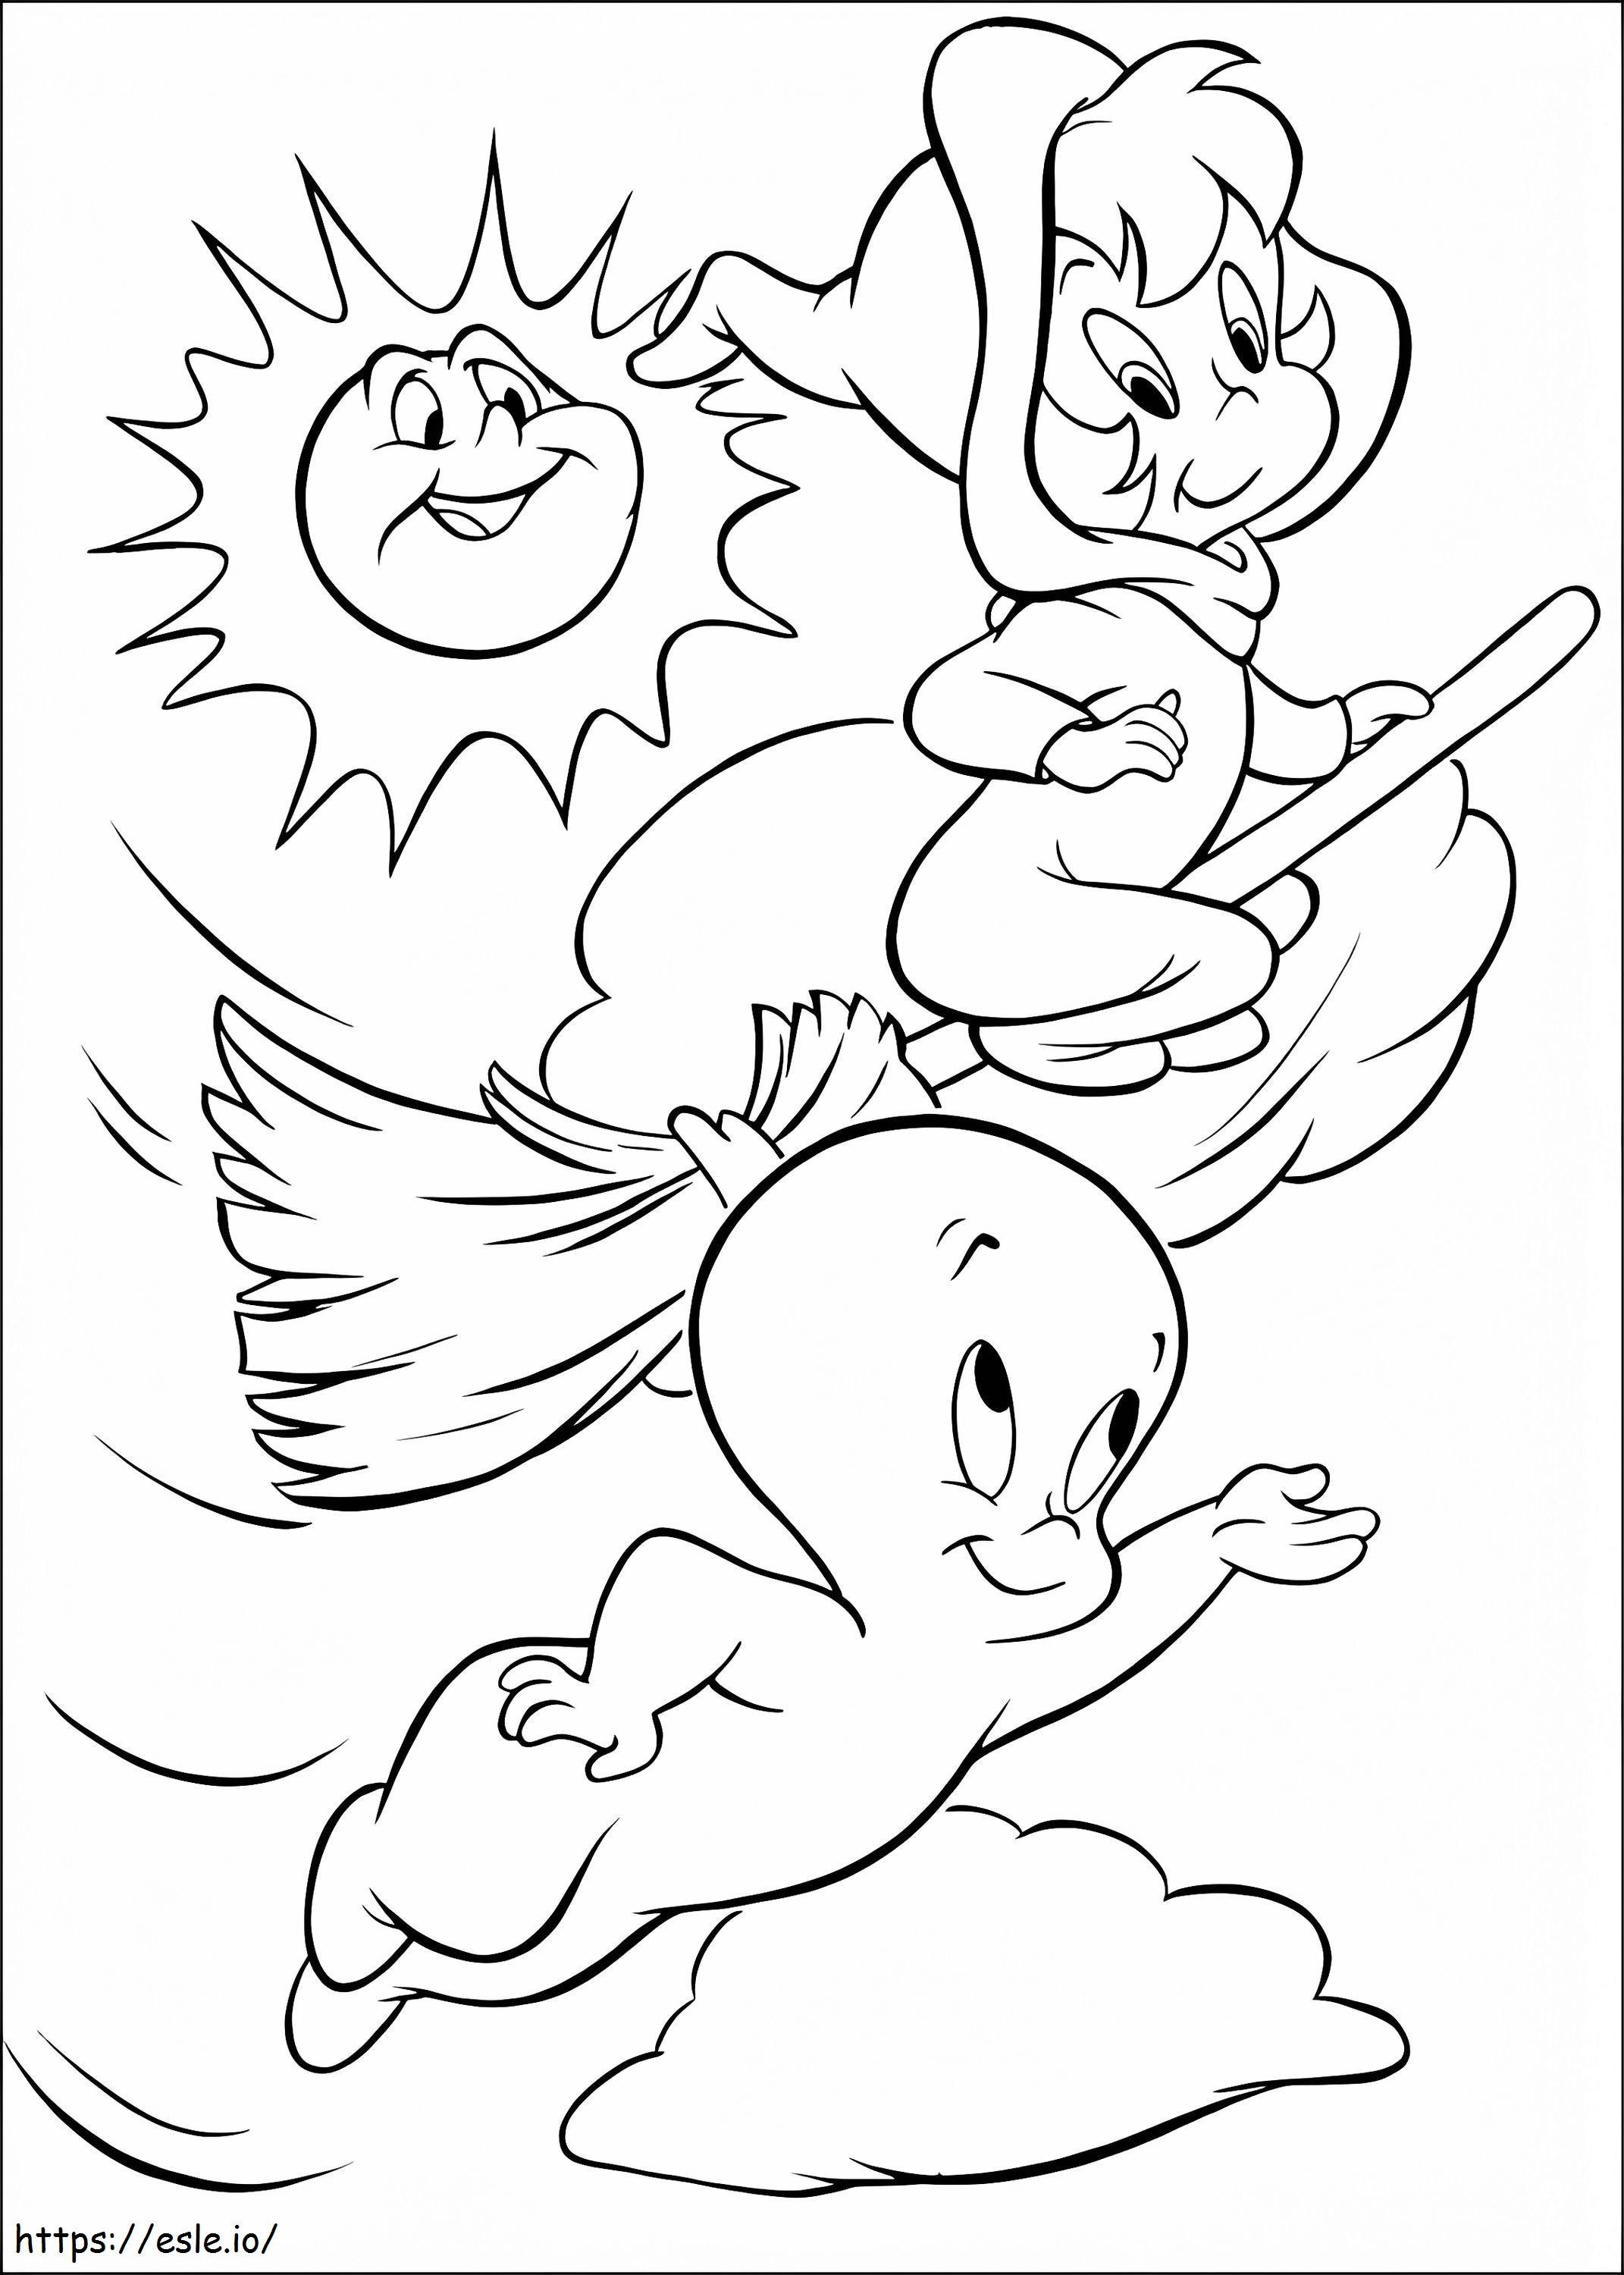 1534388745 Casper And Wendy A4 coloring page